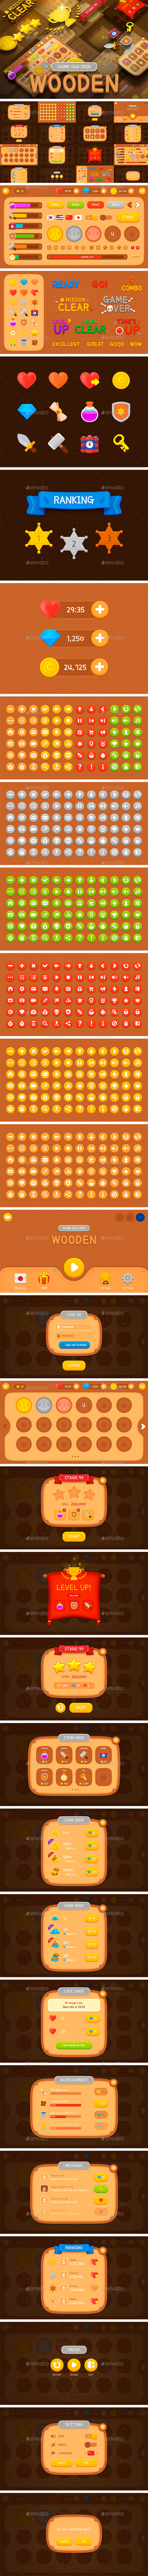 Game UI - Wooden